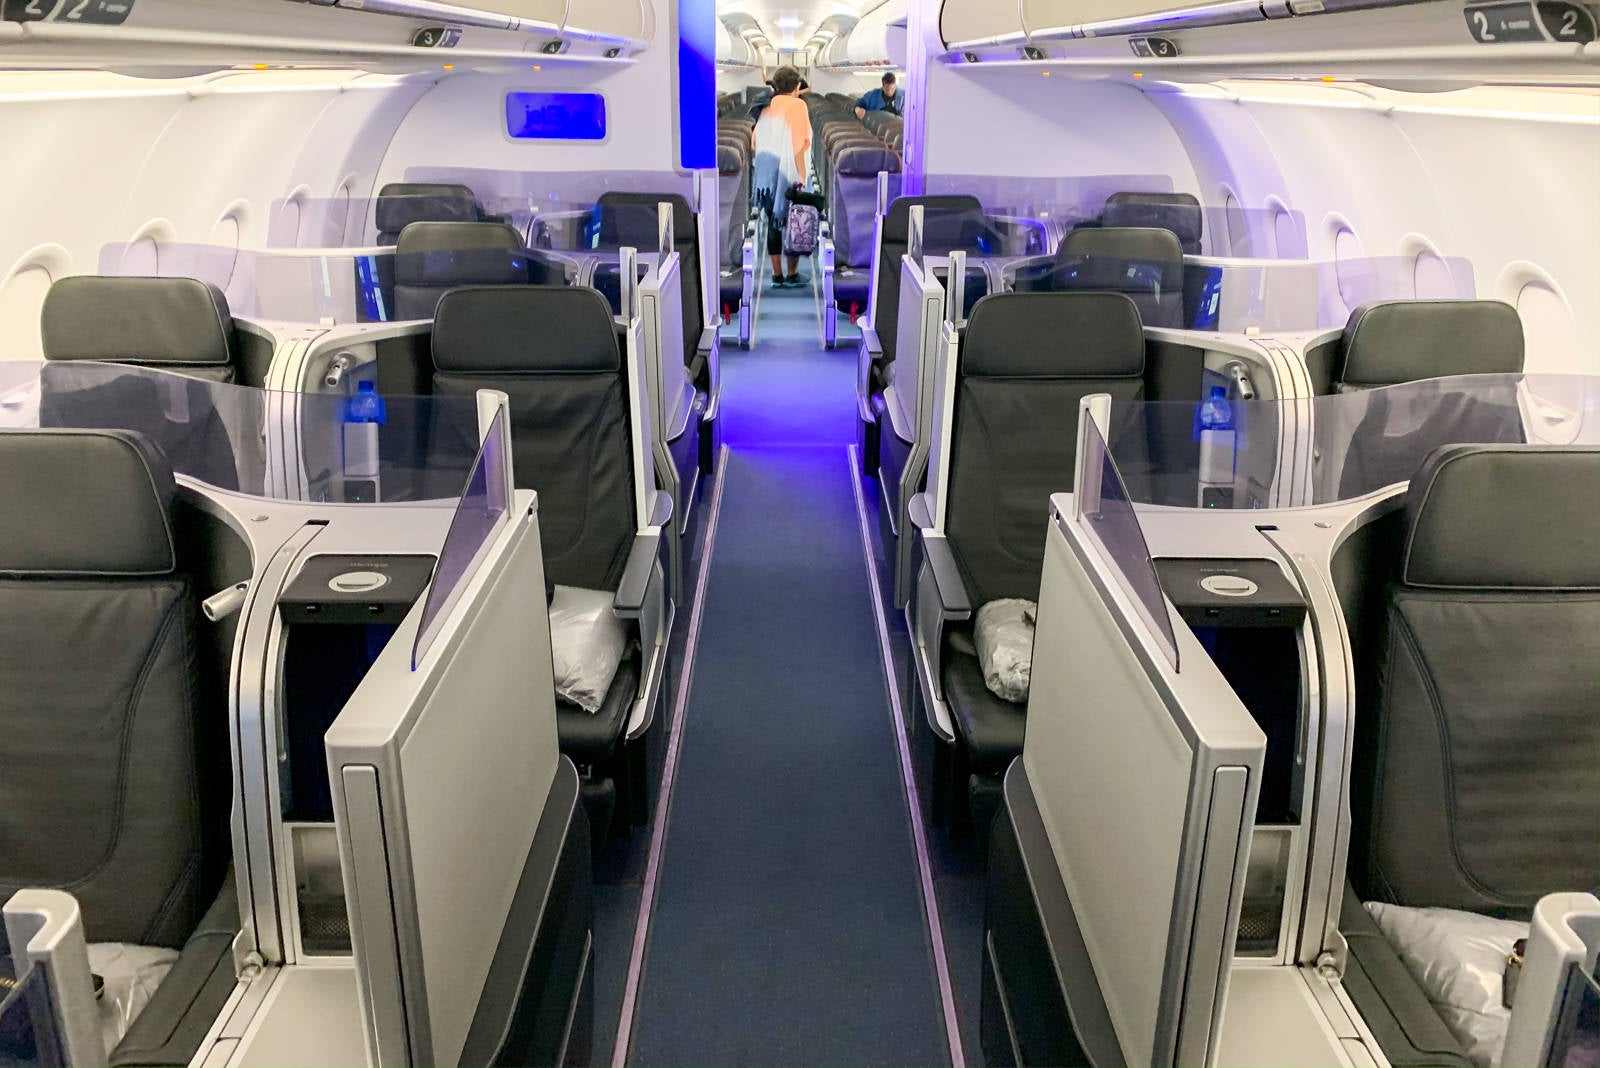 jetblue-starts-much-needed-retrofit-of-legacy-mint-business-class-seats